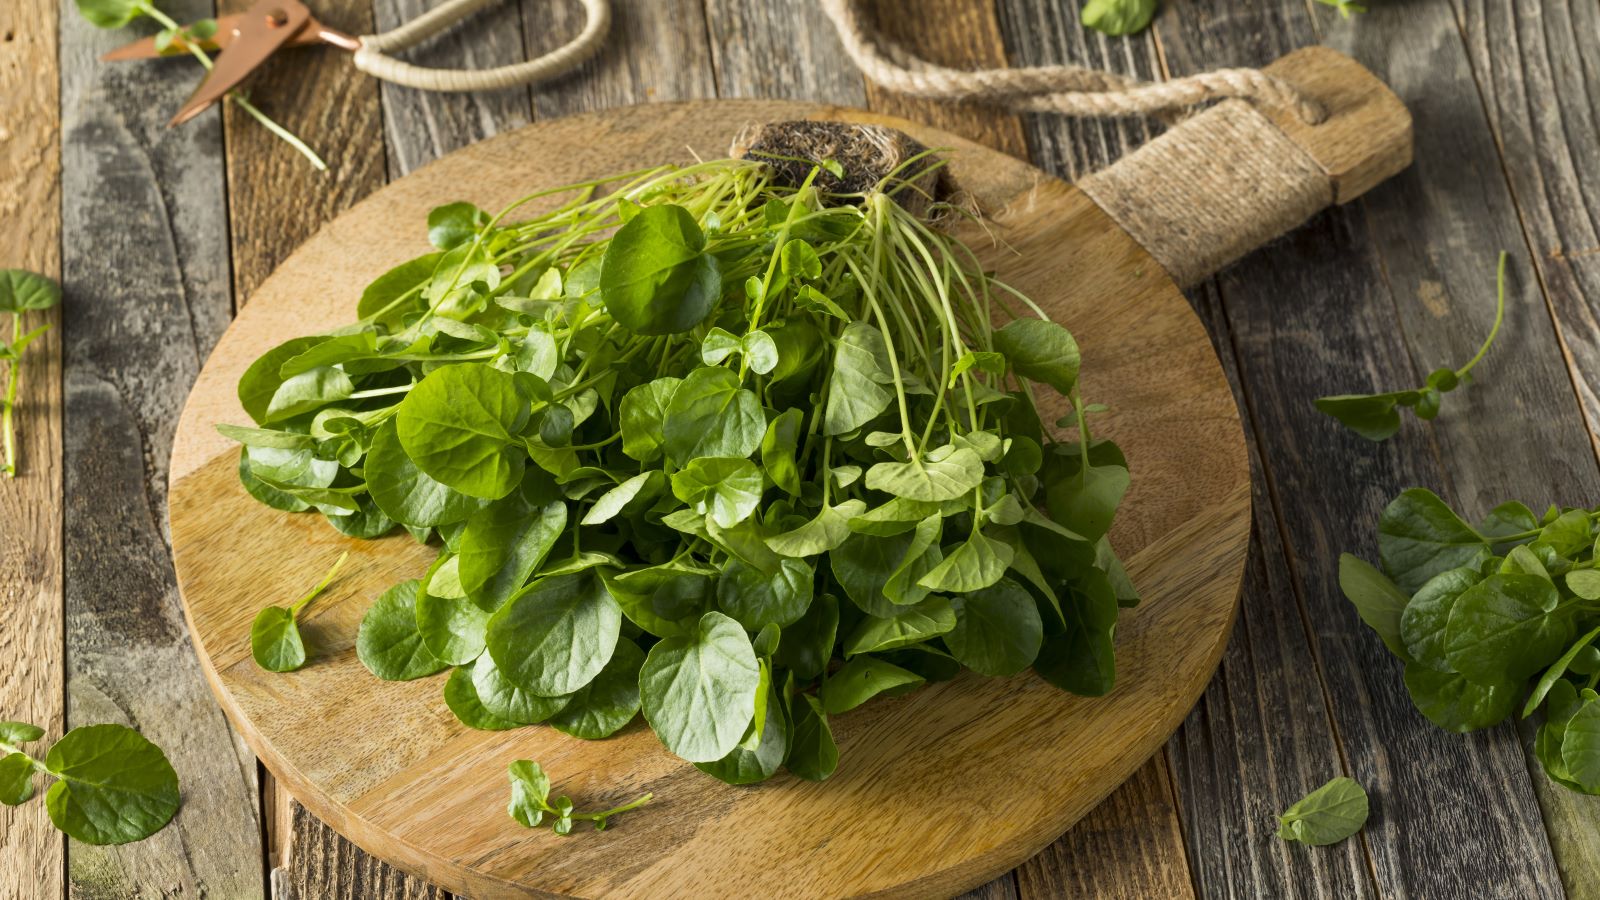 The CDC has recently named watercress the healthiest vegetable. But do the experts agree? A dietitian weighs in.